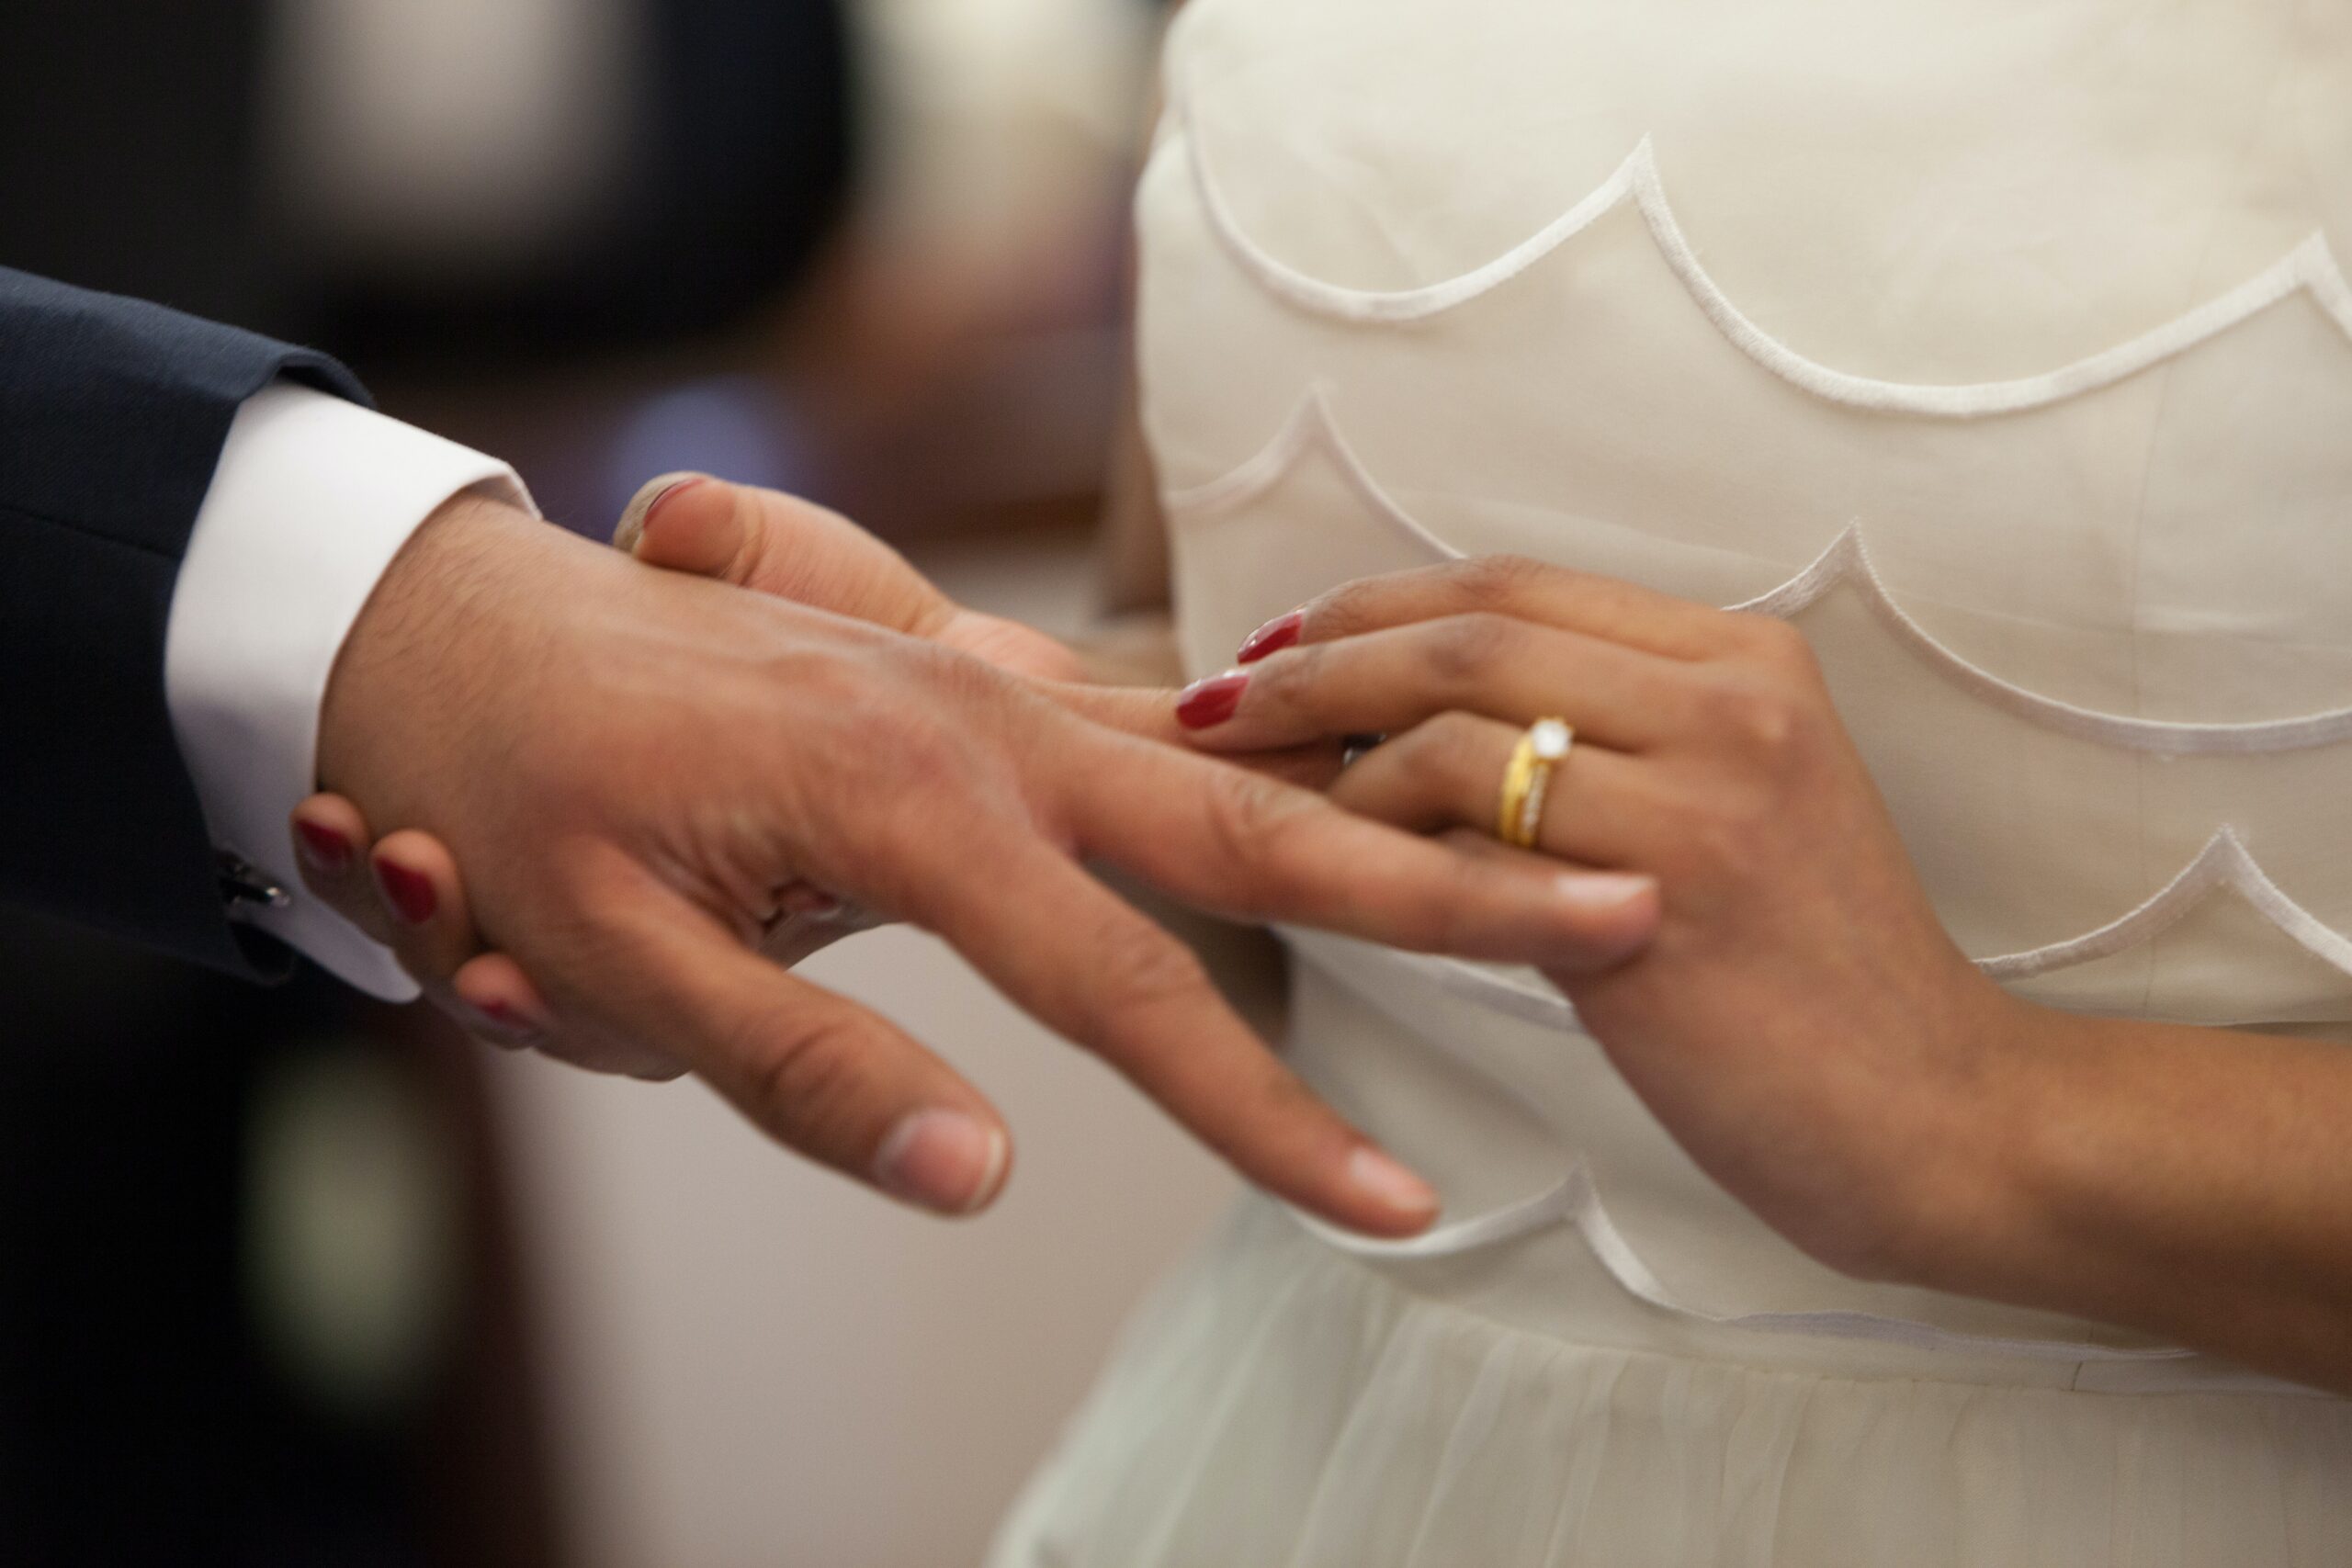 6 Basic Things a Man Should Achieve Before Getting Married